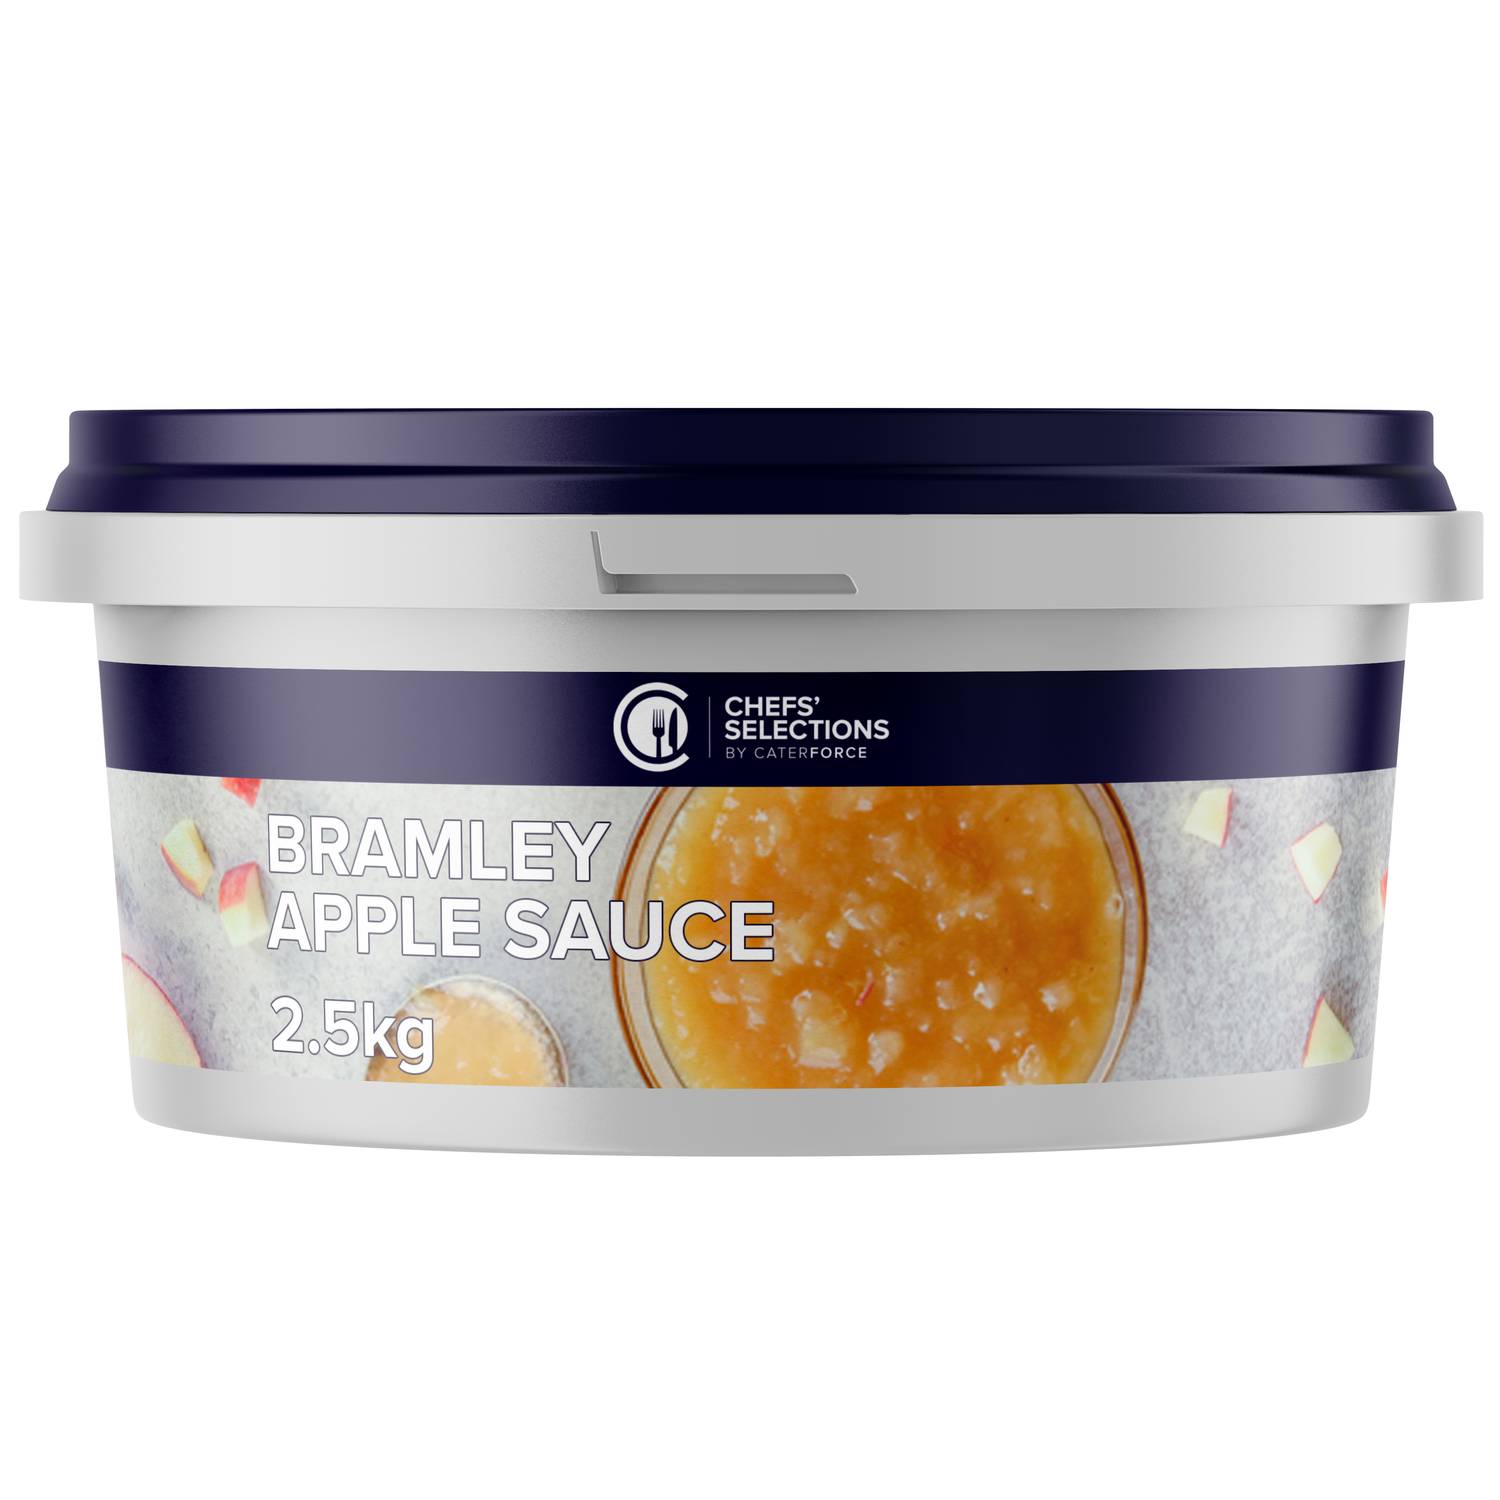 Chefs’ Selections Bramley Apple Sauce (4 x 2.5kg)